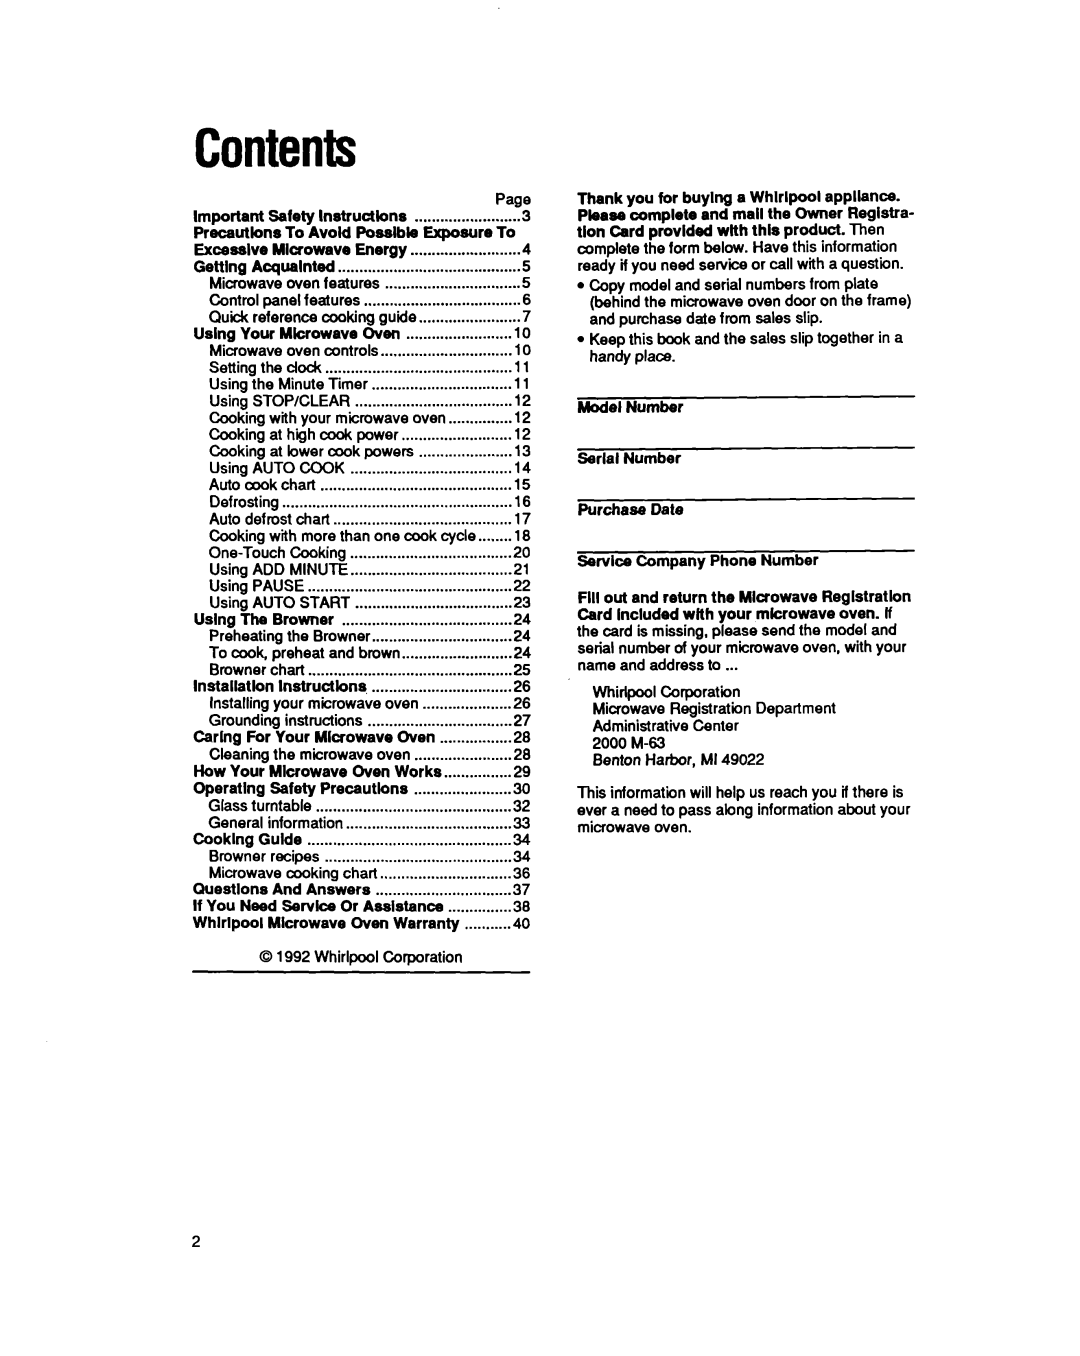 Whirlpool MB7120XY manual Contents 